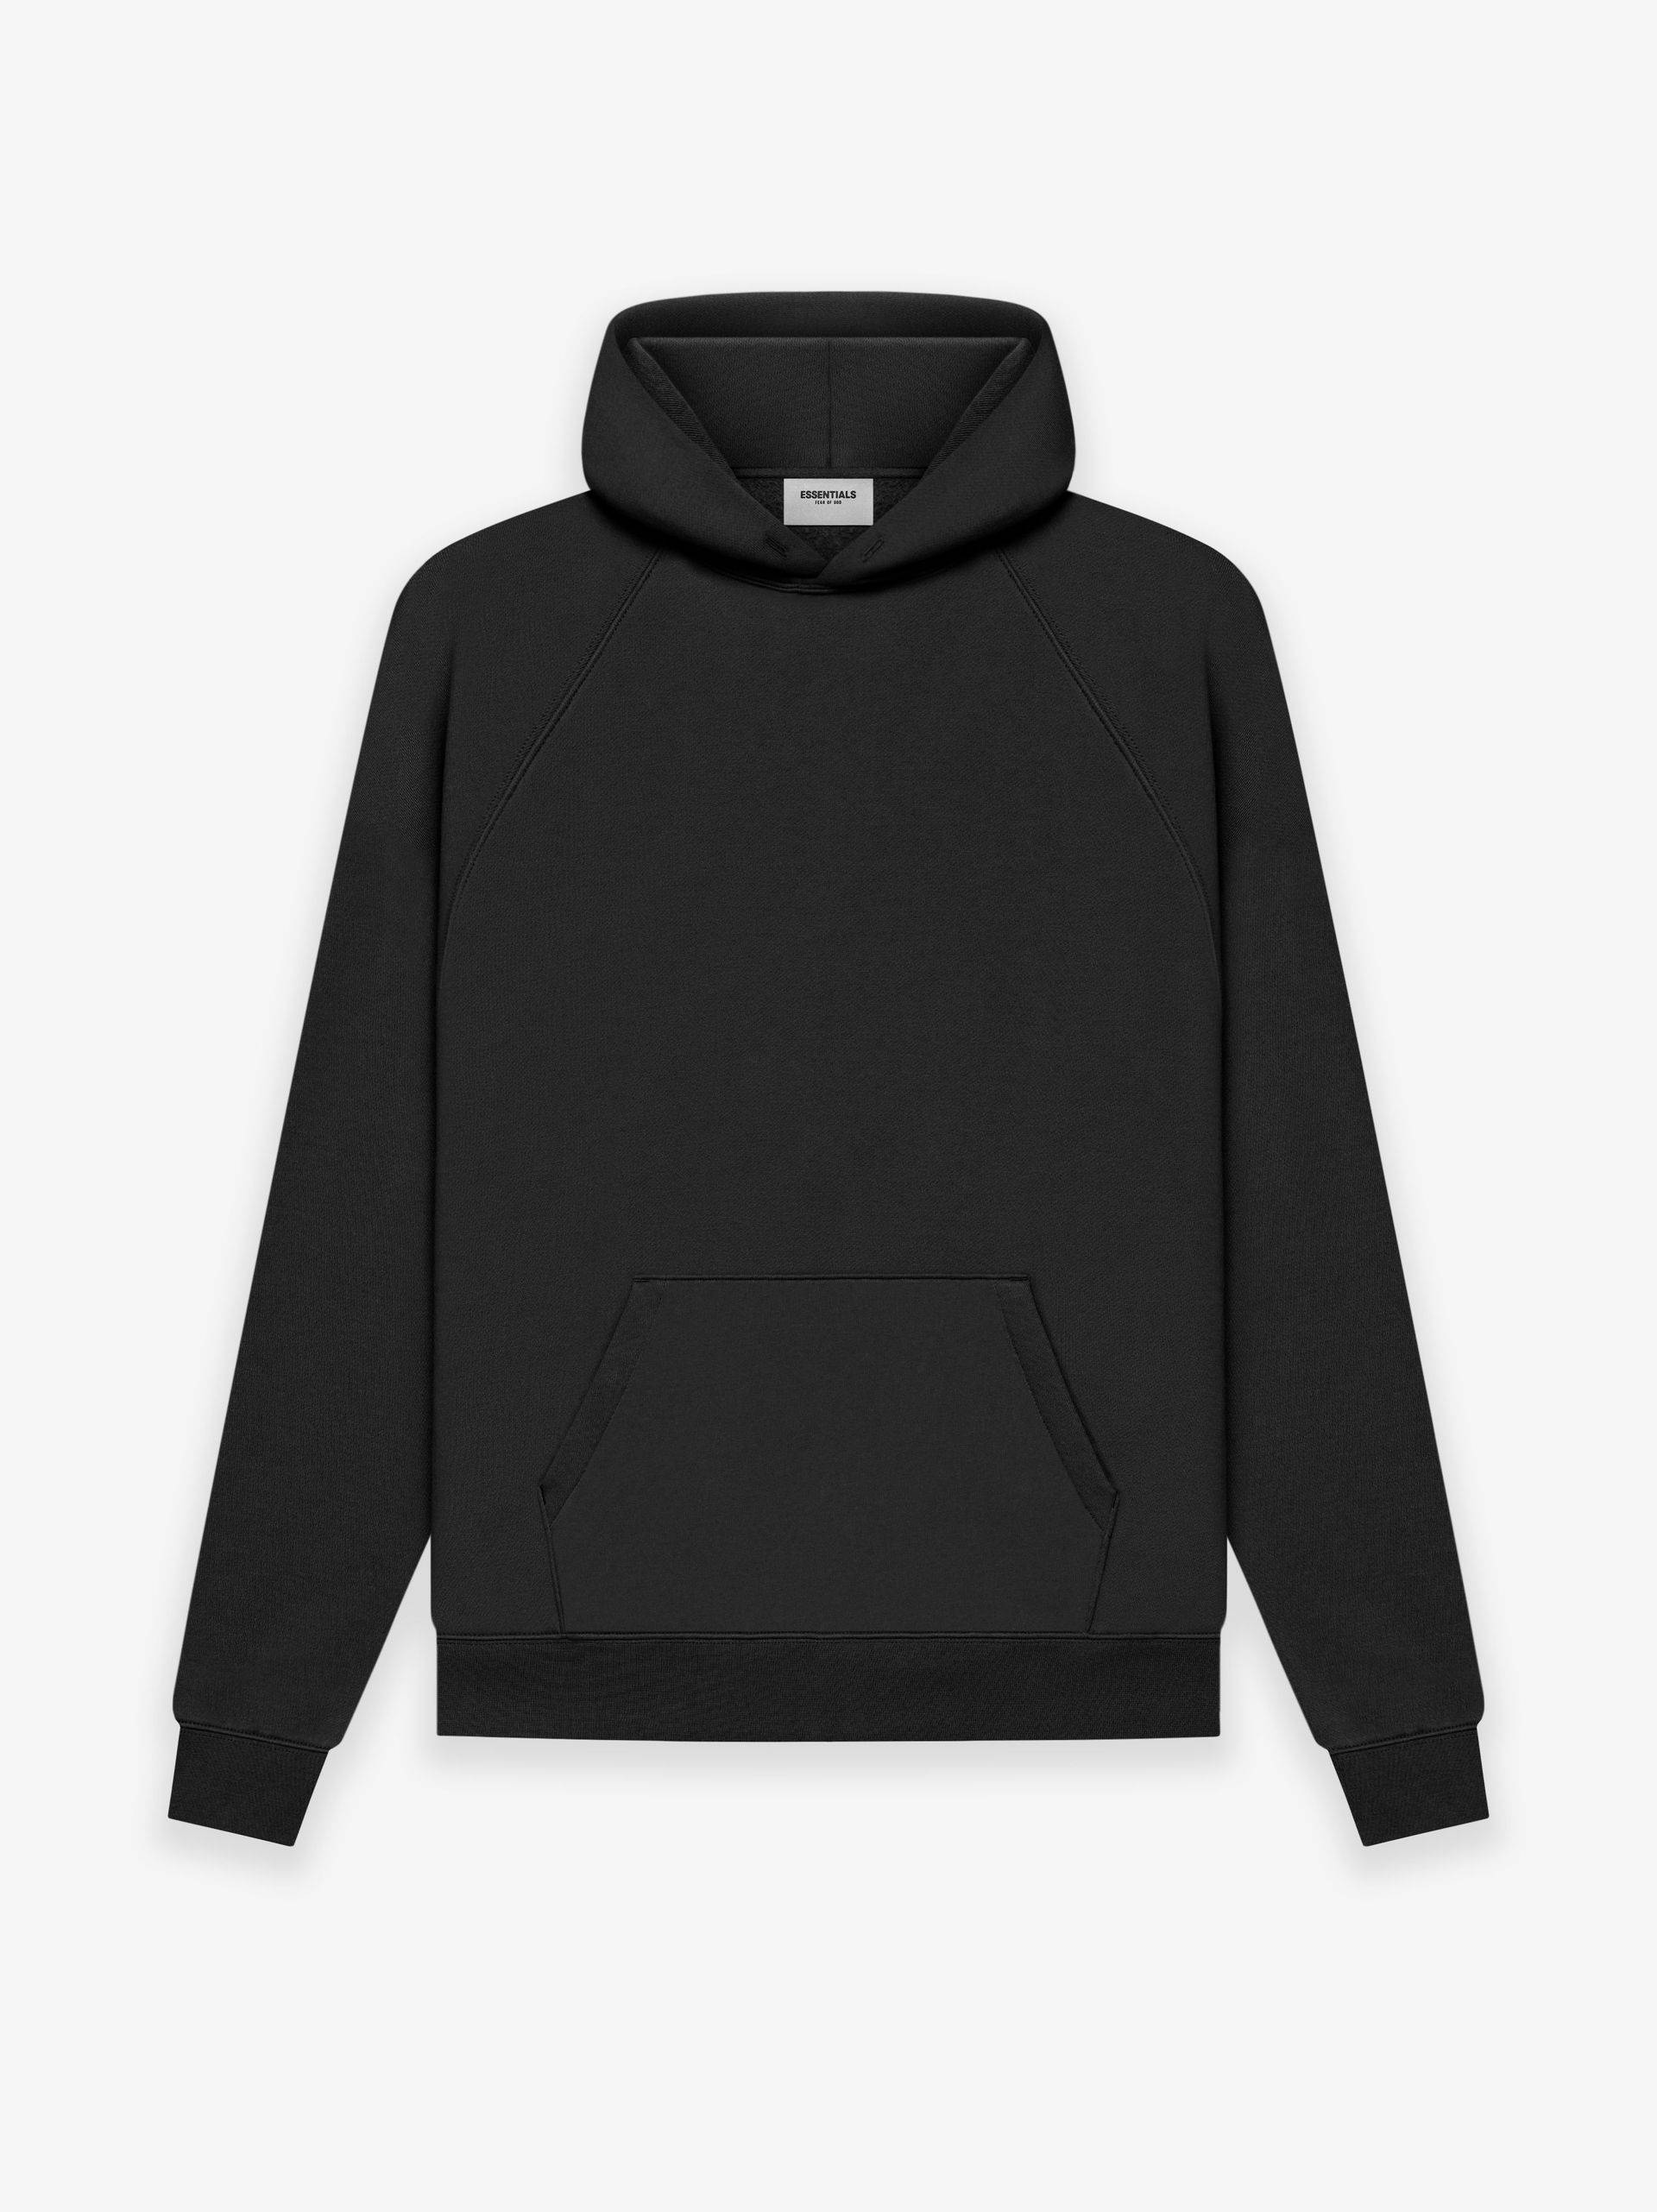 Fear of God ESSENTIALS SS21 Drop 1 Pull-Over Hoodie - Stretch Limo ...